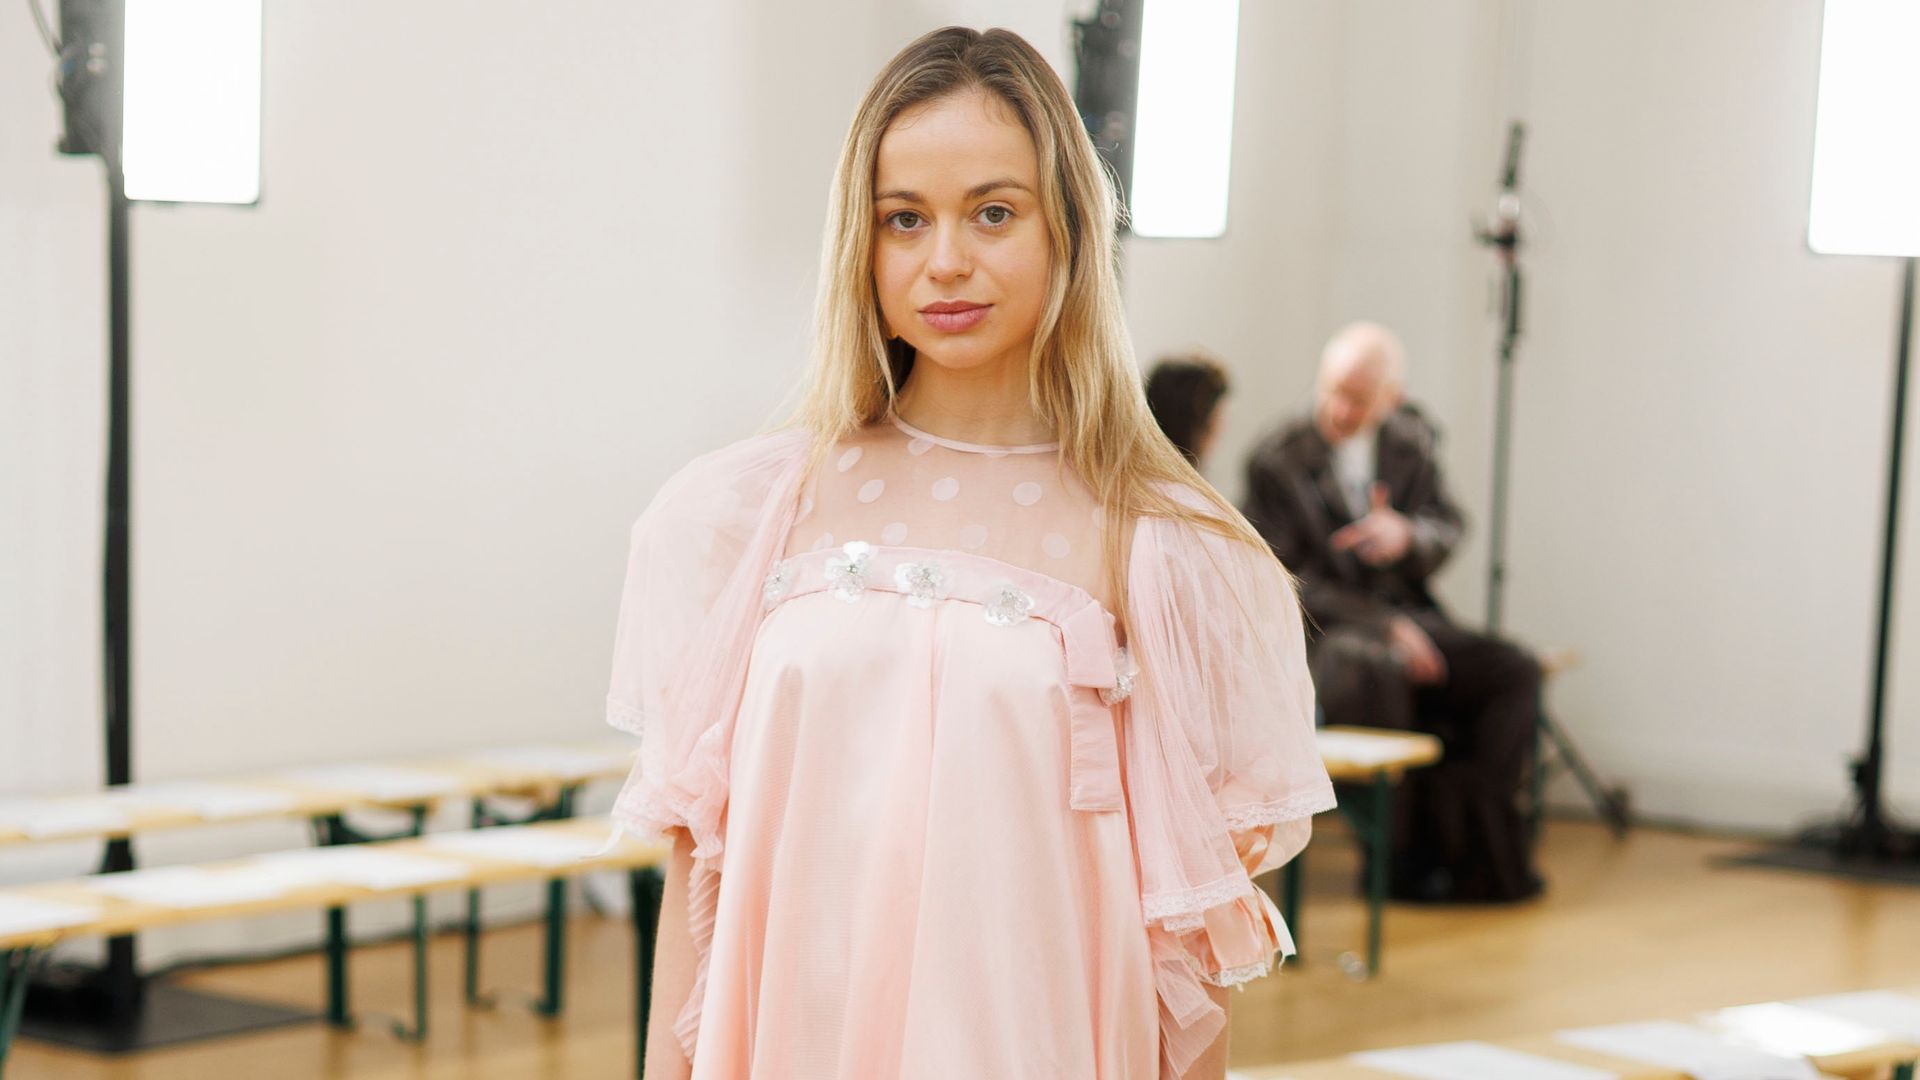 7 Eco-conscious brands to have on your radar according to Amelia Windsor